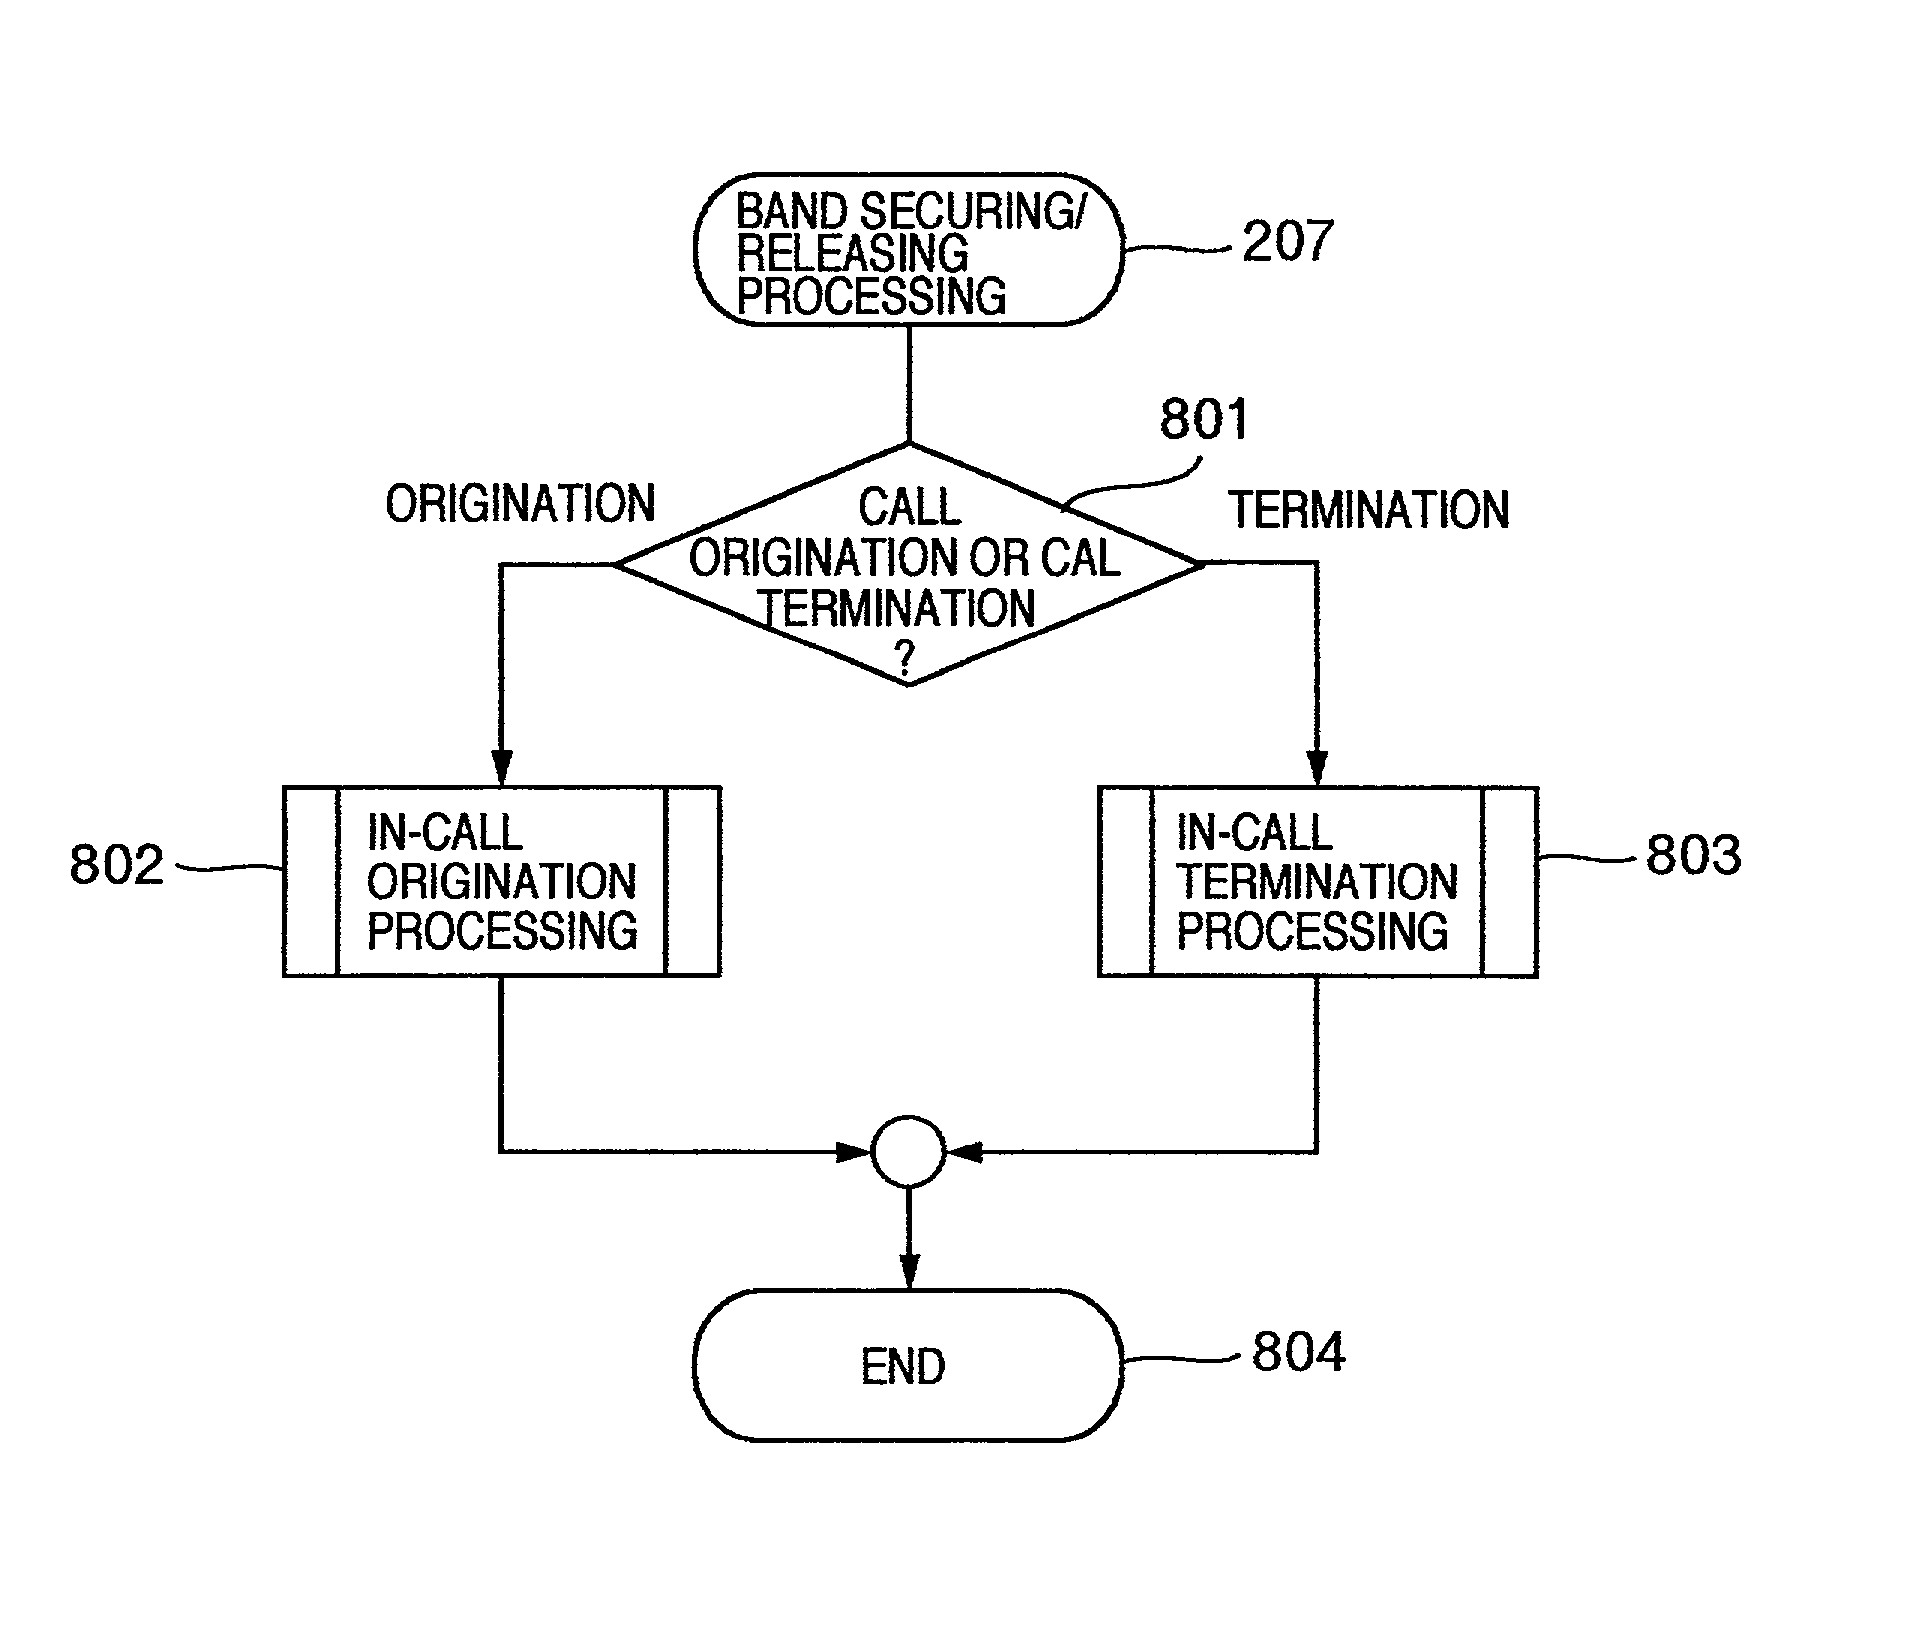 Method of requesting security and release of communication band